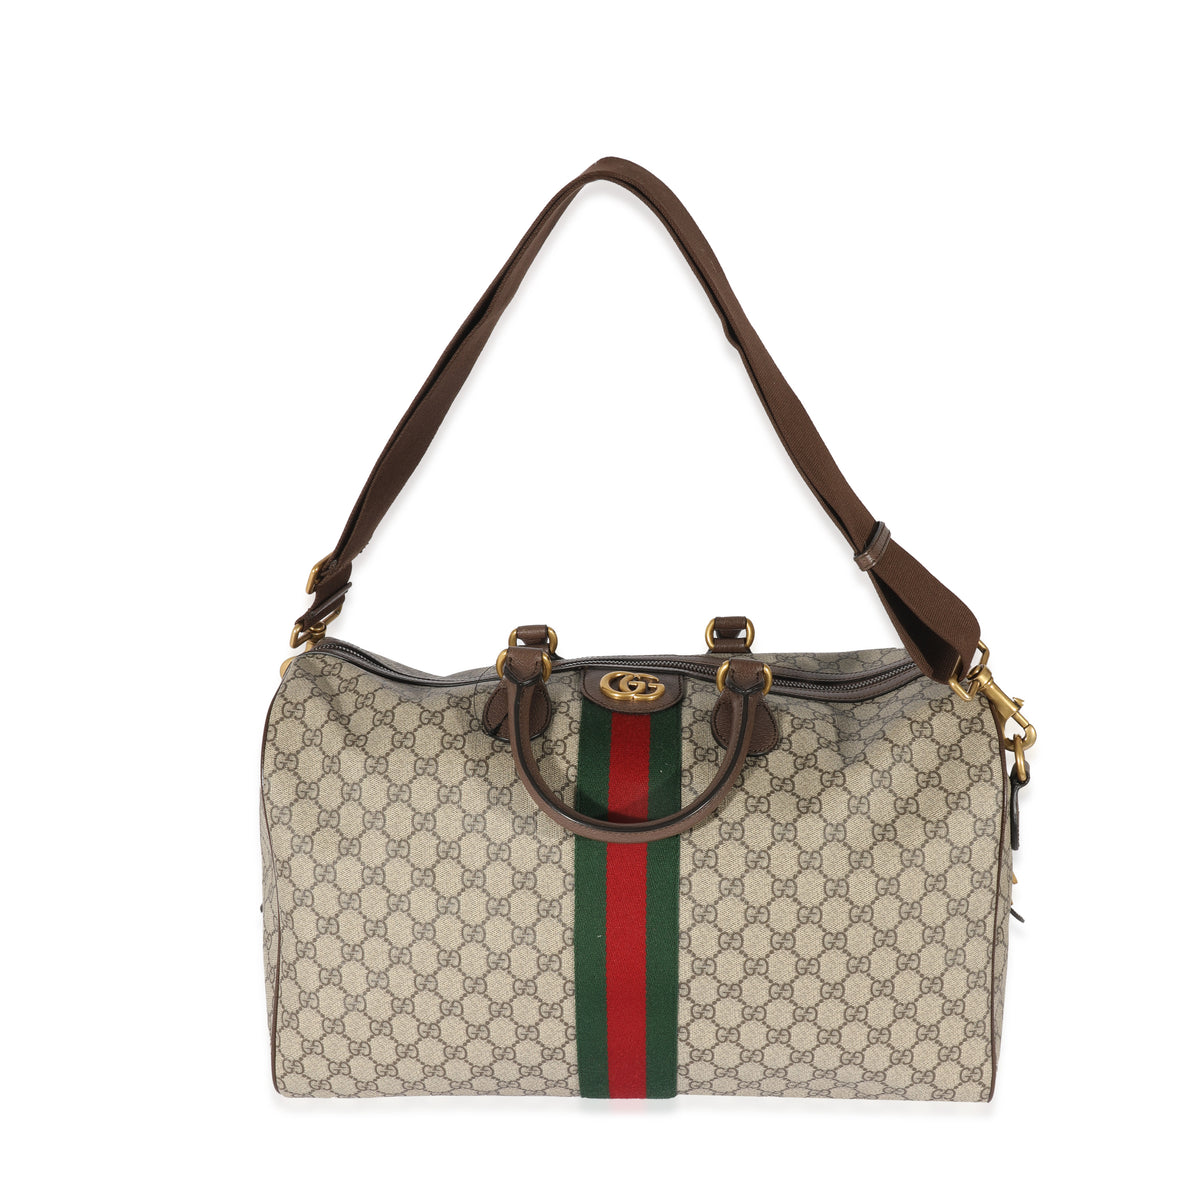 GUCCI OPHIDIA DUFFLE BAG REVIEW! Gucci Ophidia vs. Louis Vuitton Keepall 